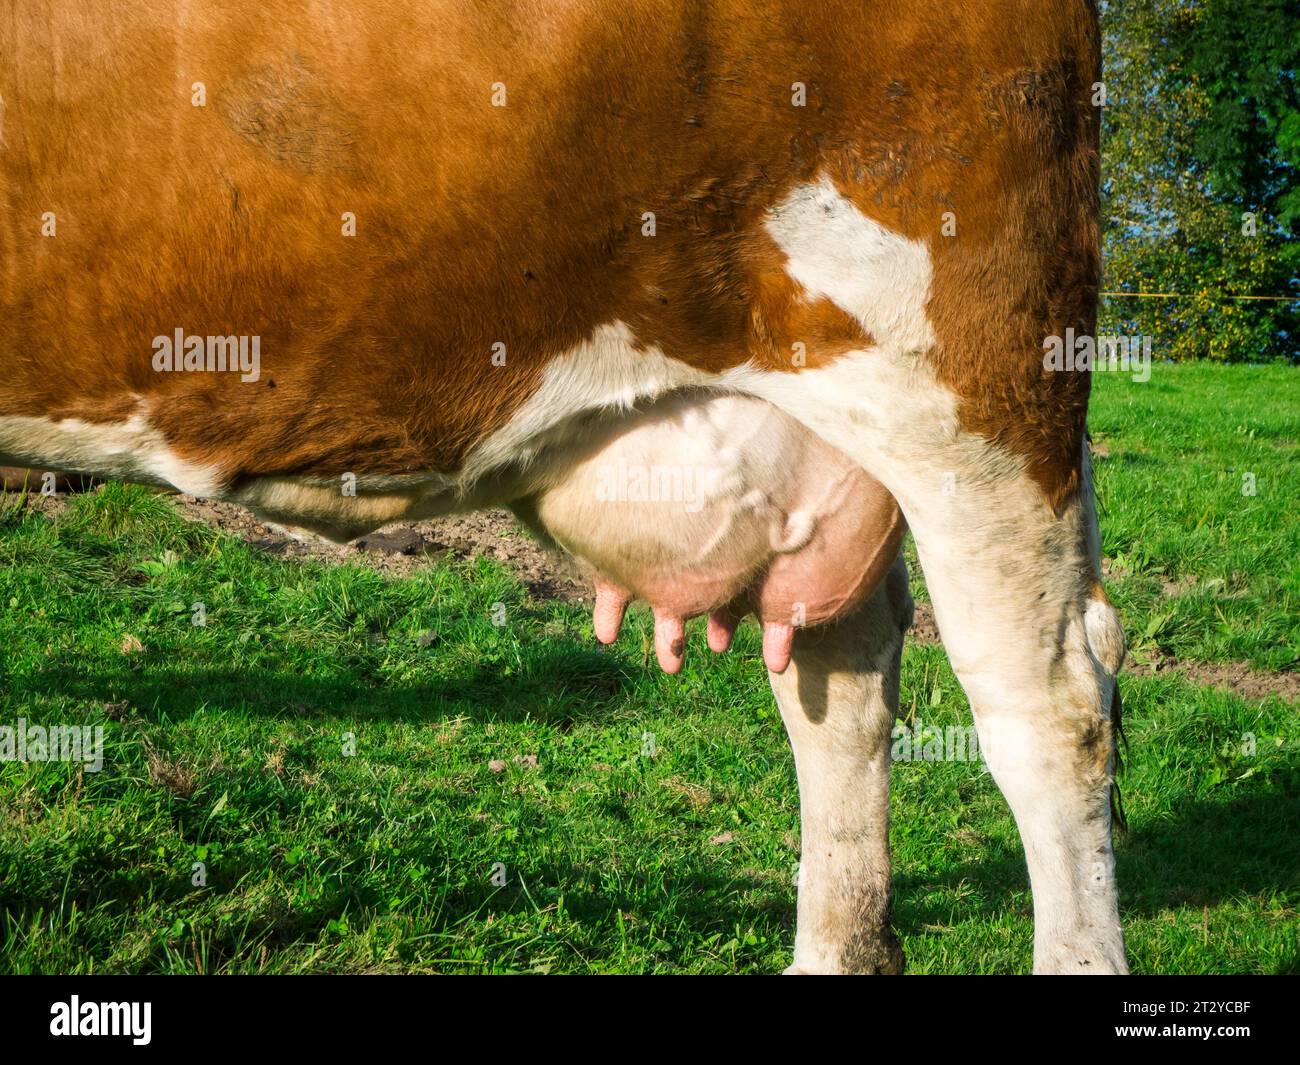 Close side view of the rump of a brown and white spotted dairy cow with a full udder standing in a pasture. Stock Photo